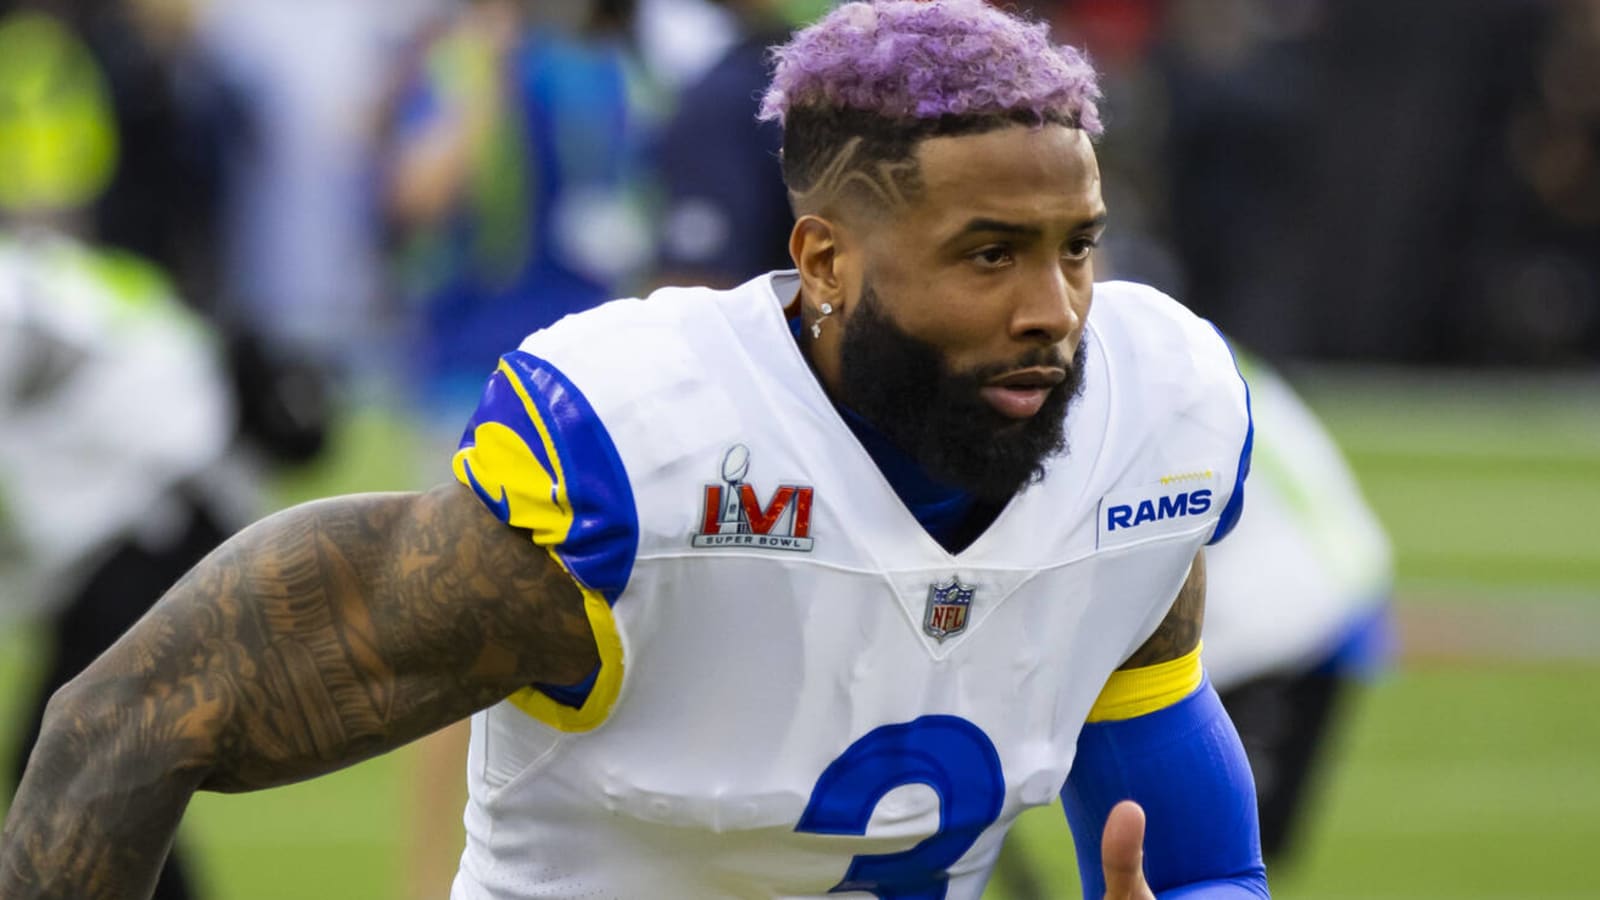 Rams remain interested in re-signing Odell Beckham Jr.